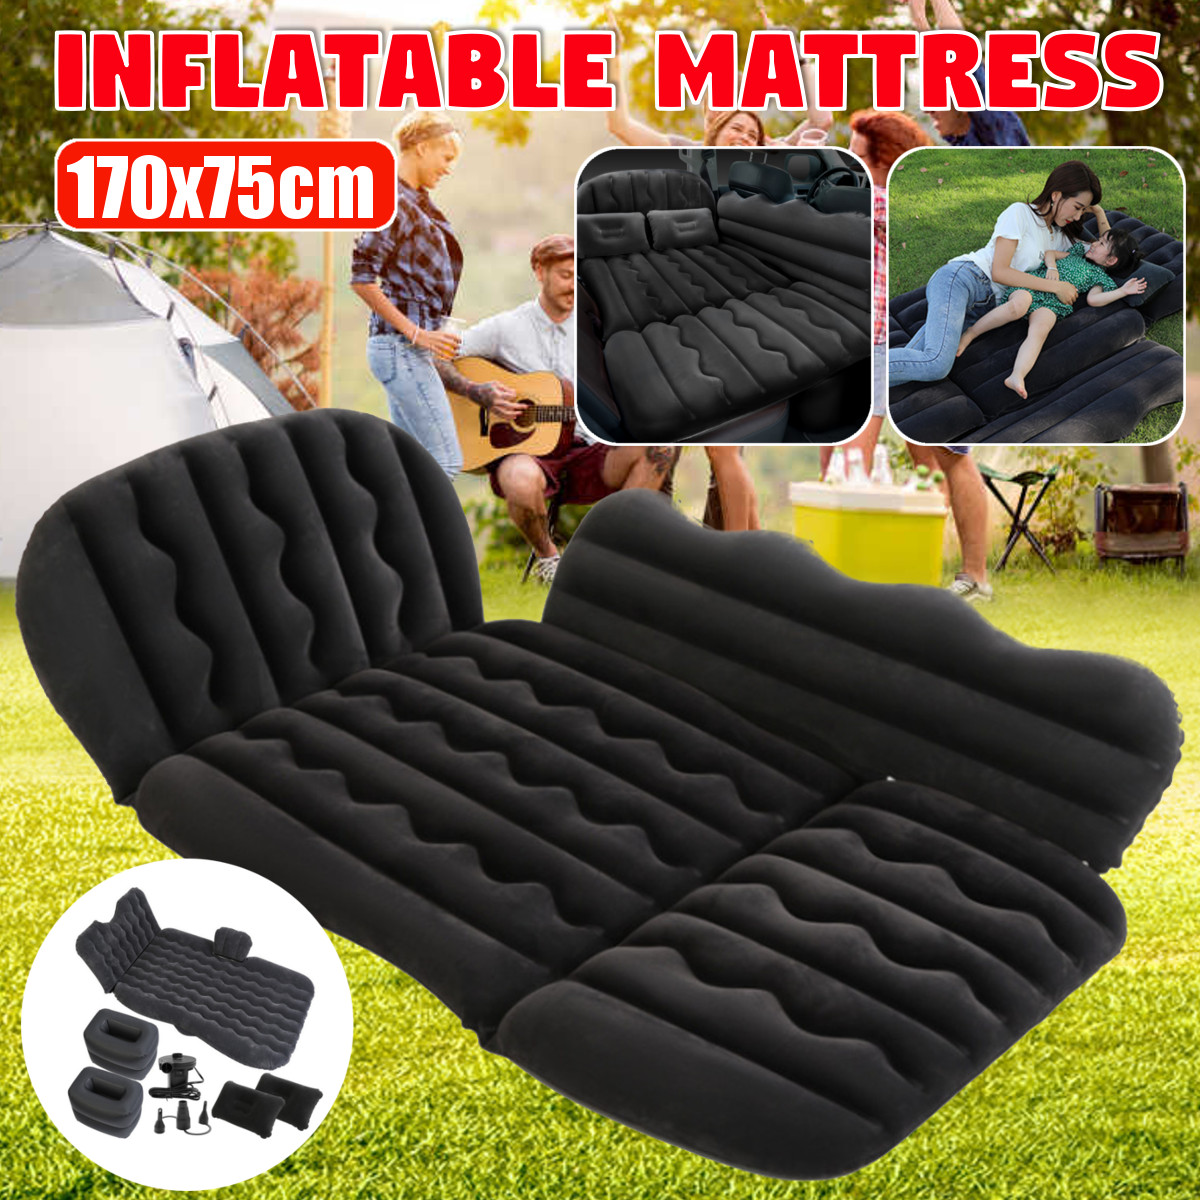 6693x2953inch-Car-Air-Bed-Inflatable-Mattress-Travel-Sleeping-Camping-Cushion-Back-Seat-Pads-1761692-1